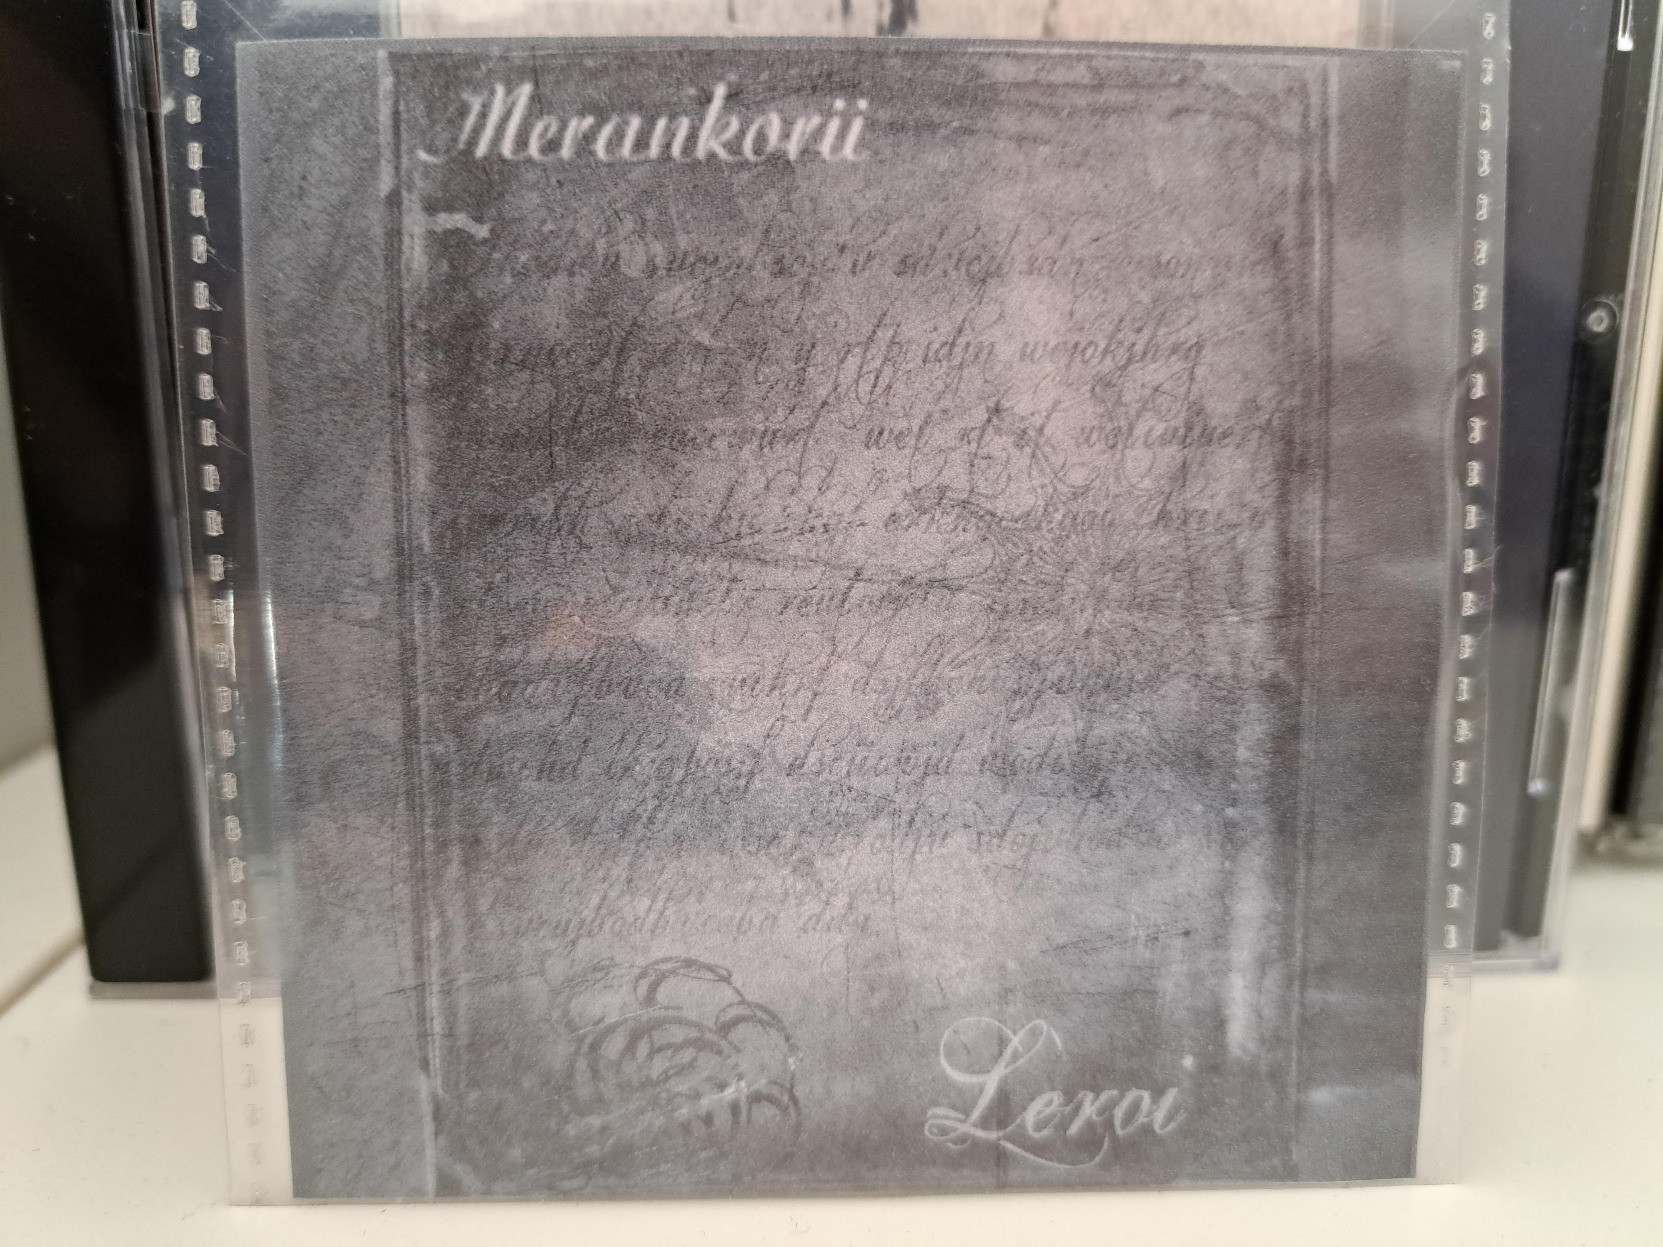 Merankorii's Leroi, a composition released in a 3" CD, 15 years ago, when dungeon synth wasn't a trend, and every band had a myspace.